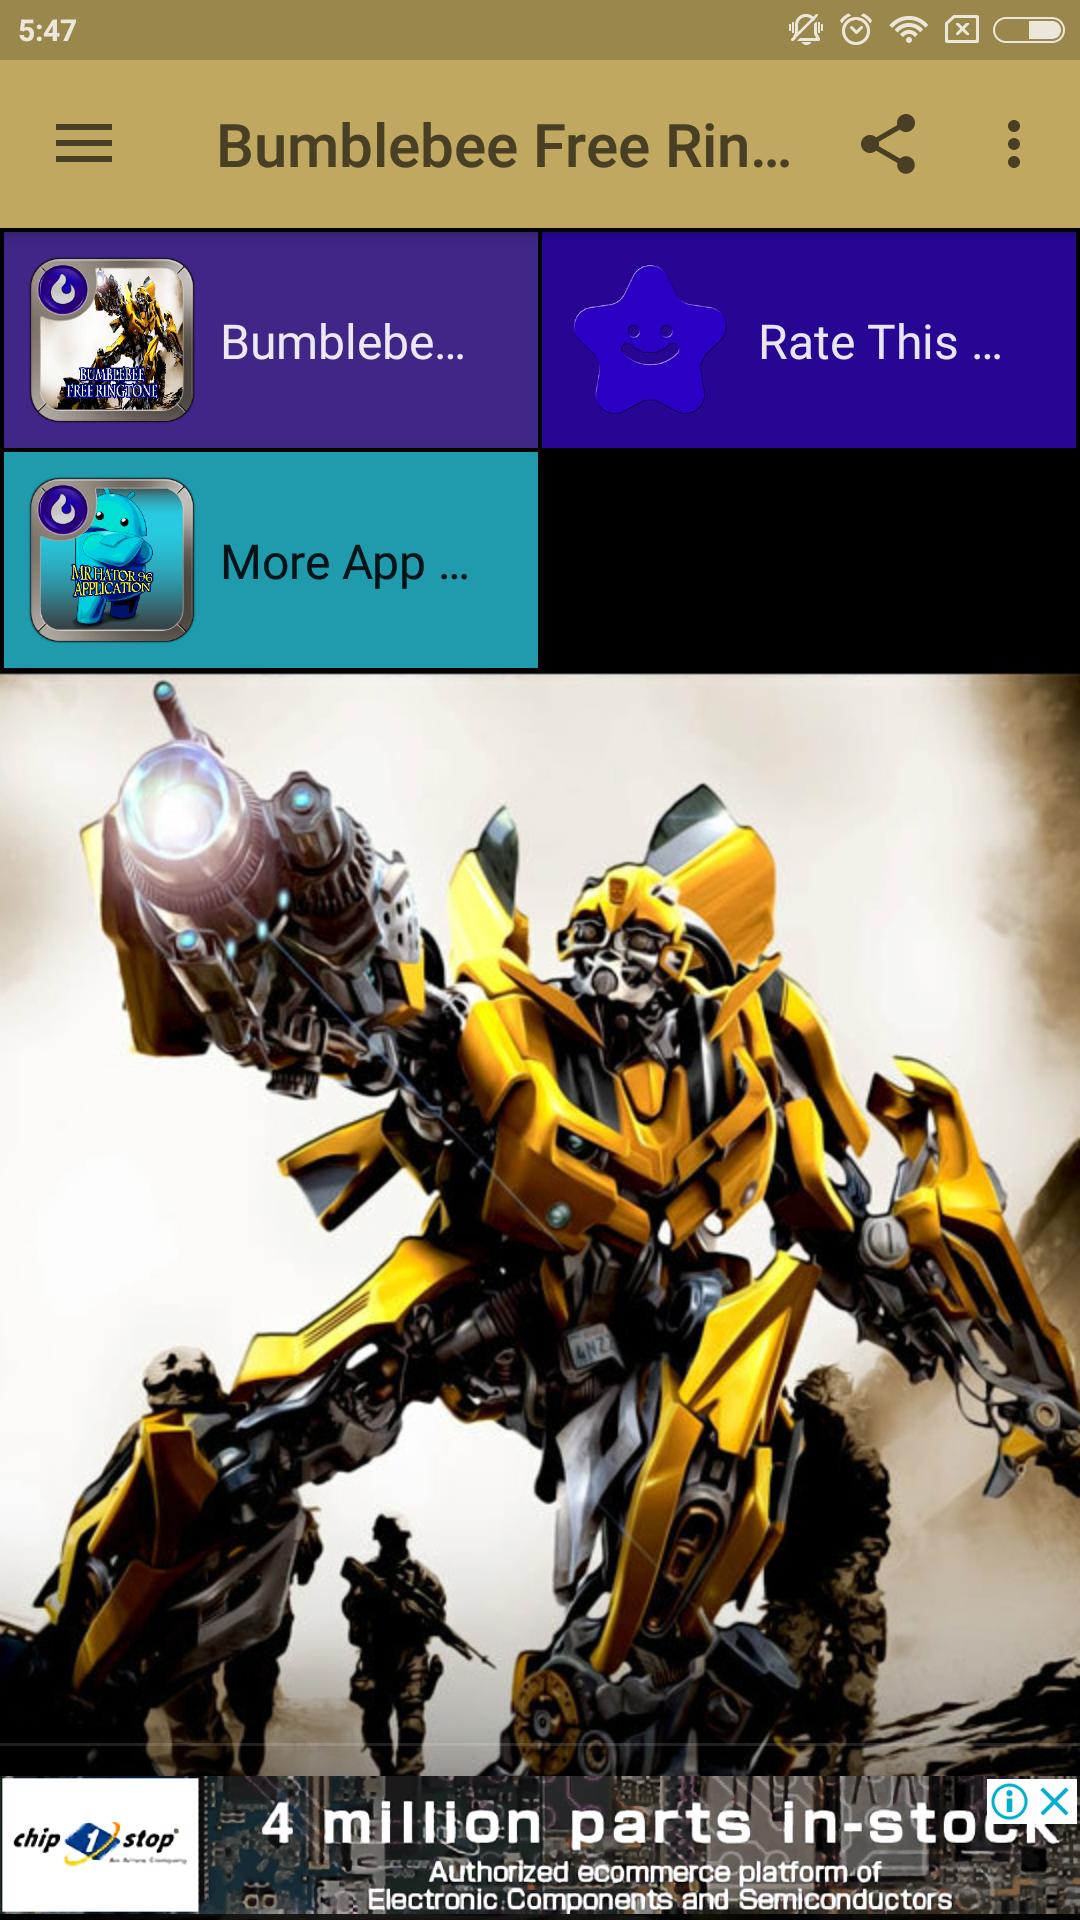 Bumblebee Ringtone Free for Android - APK Download